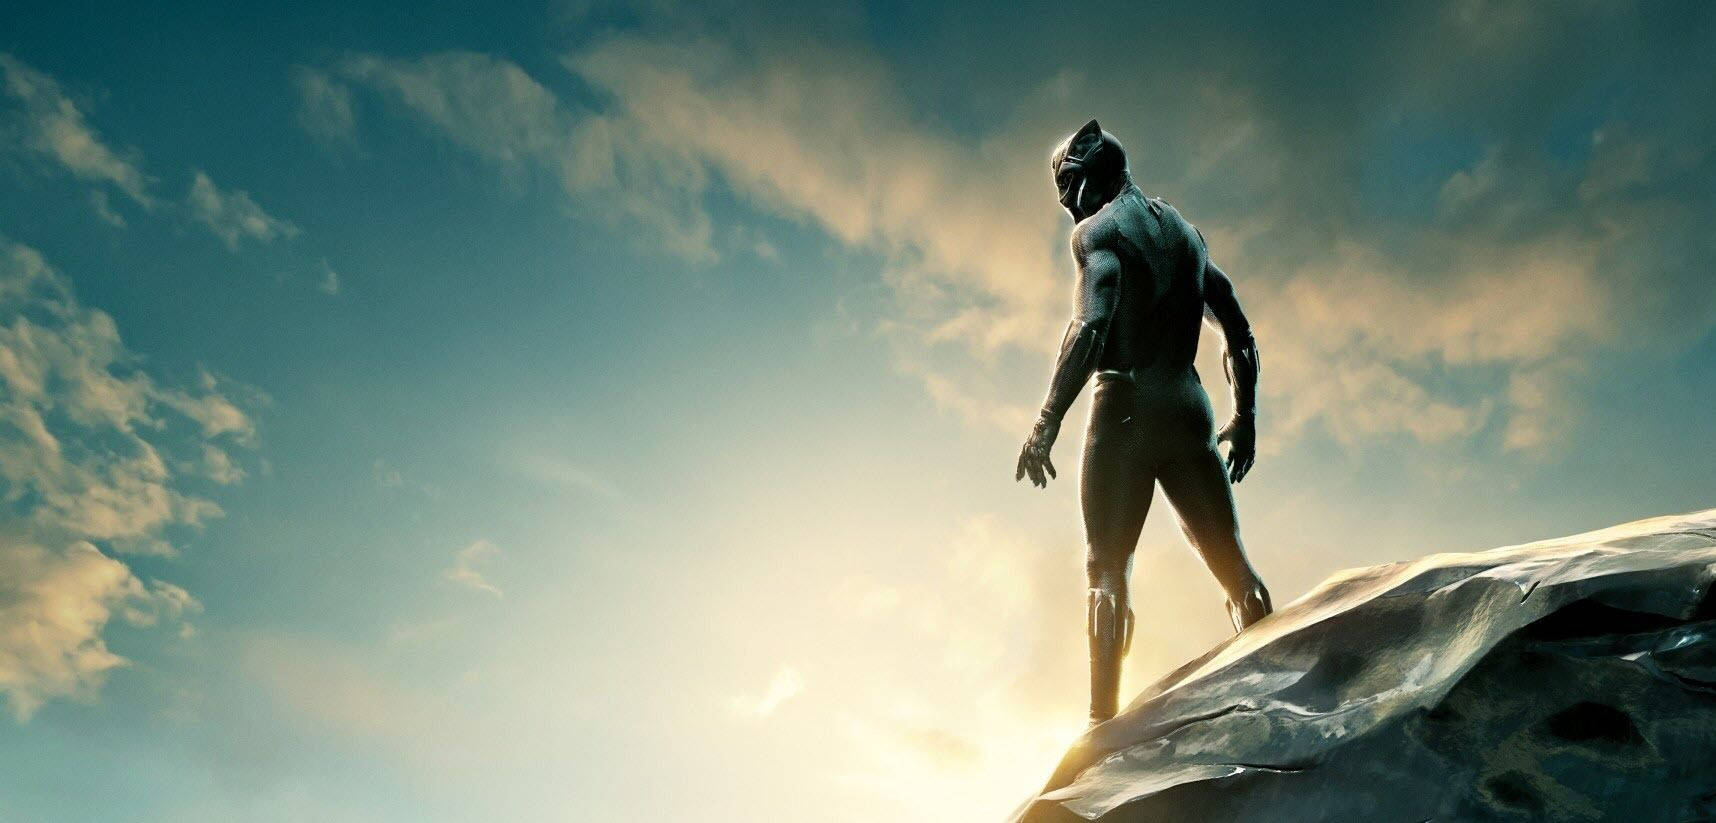 "The Black Panther, a powerful superhero and protector of Wakanda." Wallpaper